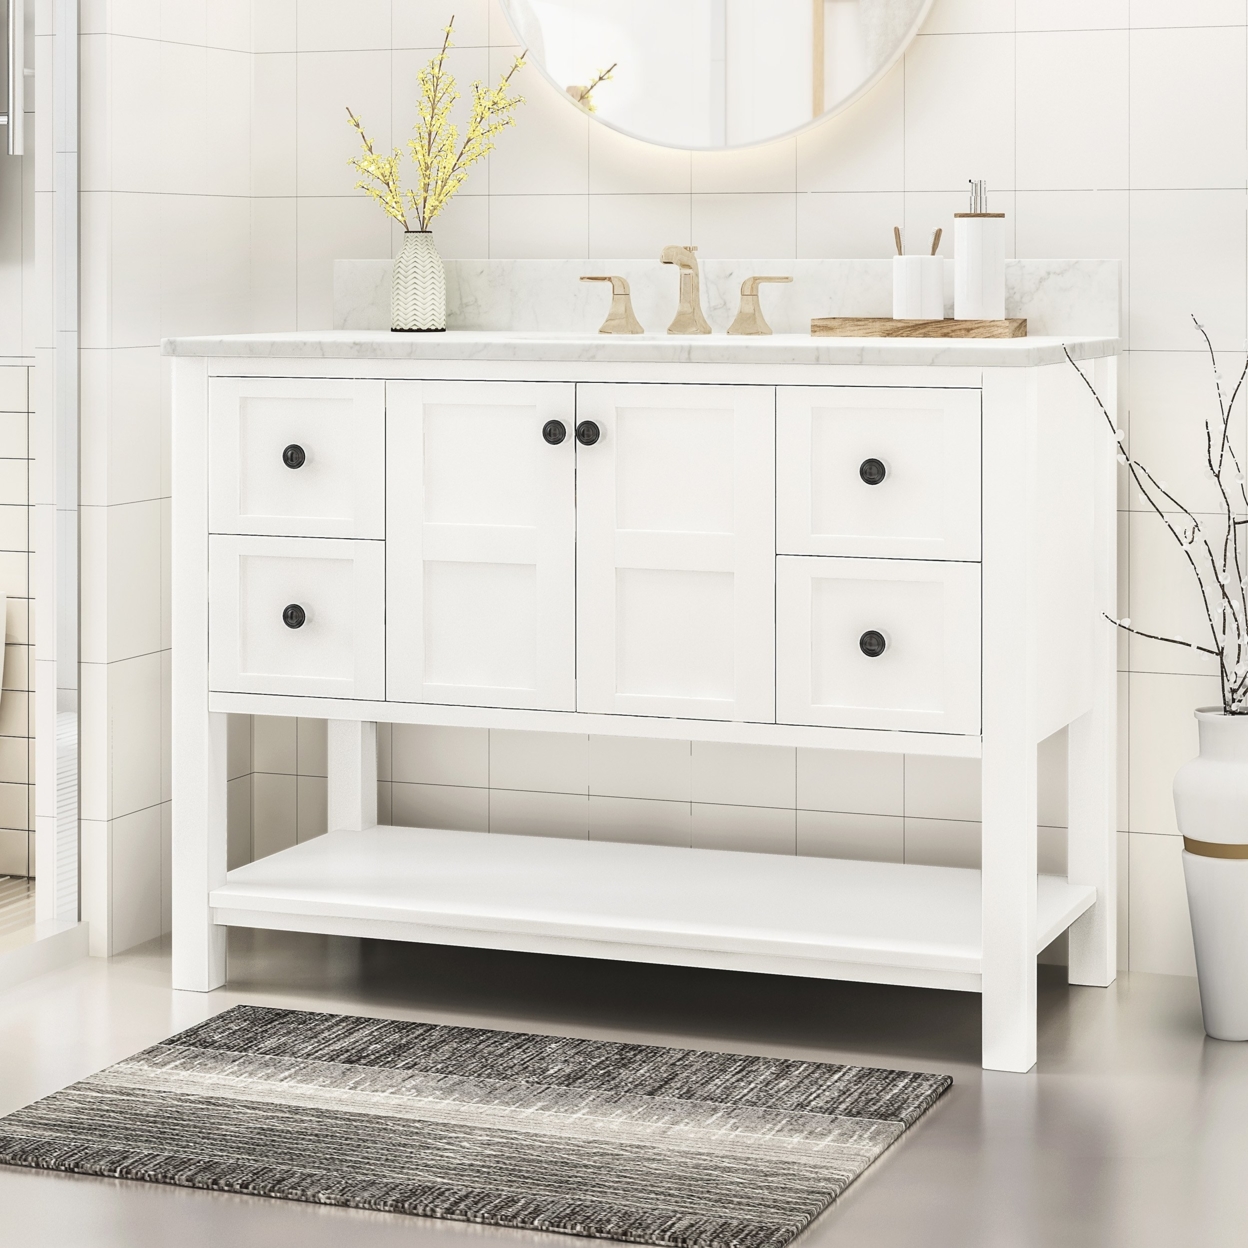 Jamison Contemporary 48 Wood Single Sink Bathroom Vanity With Marble Counter Top With Carrara White Marble - White